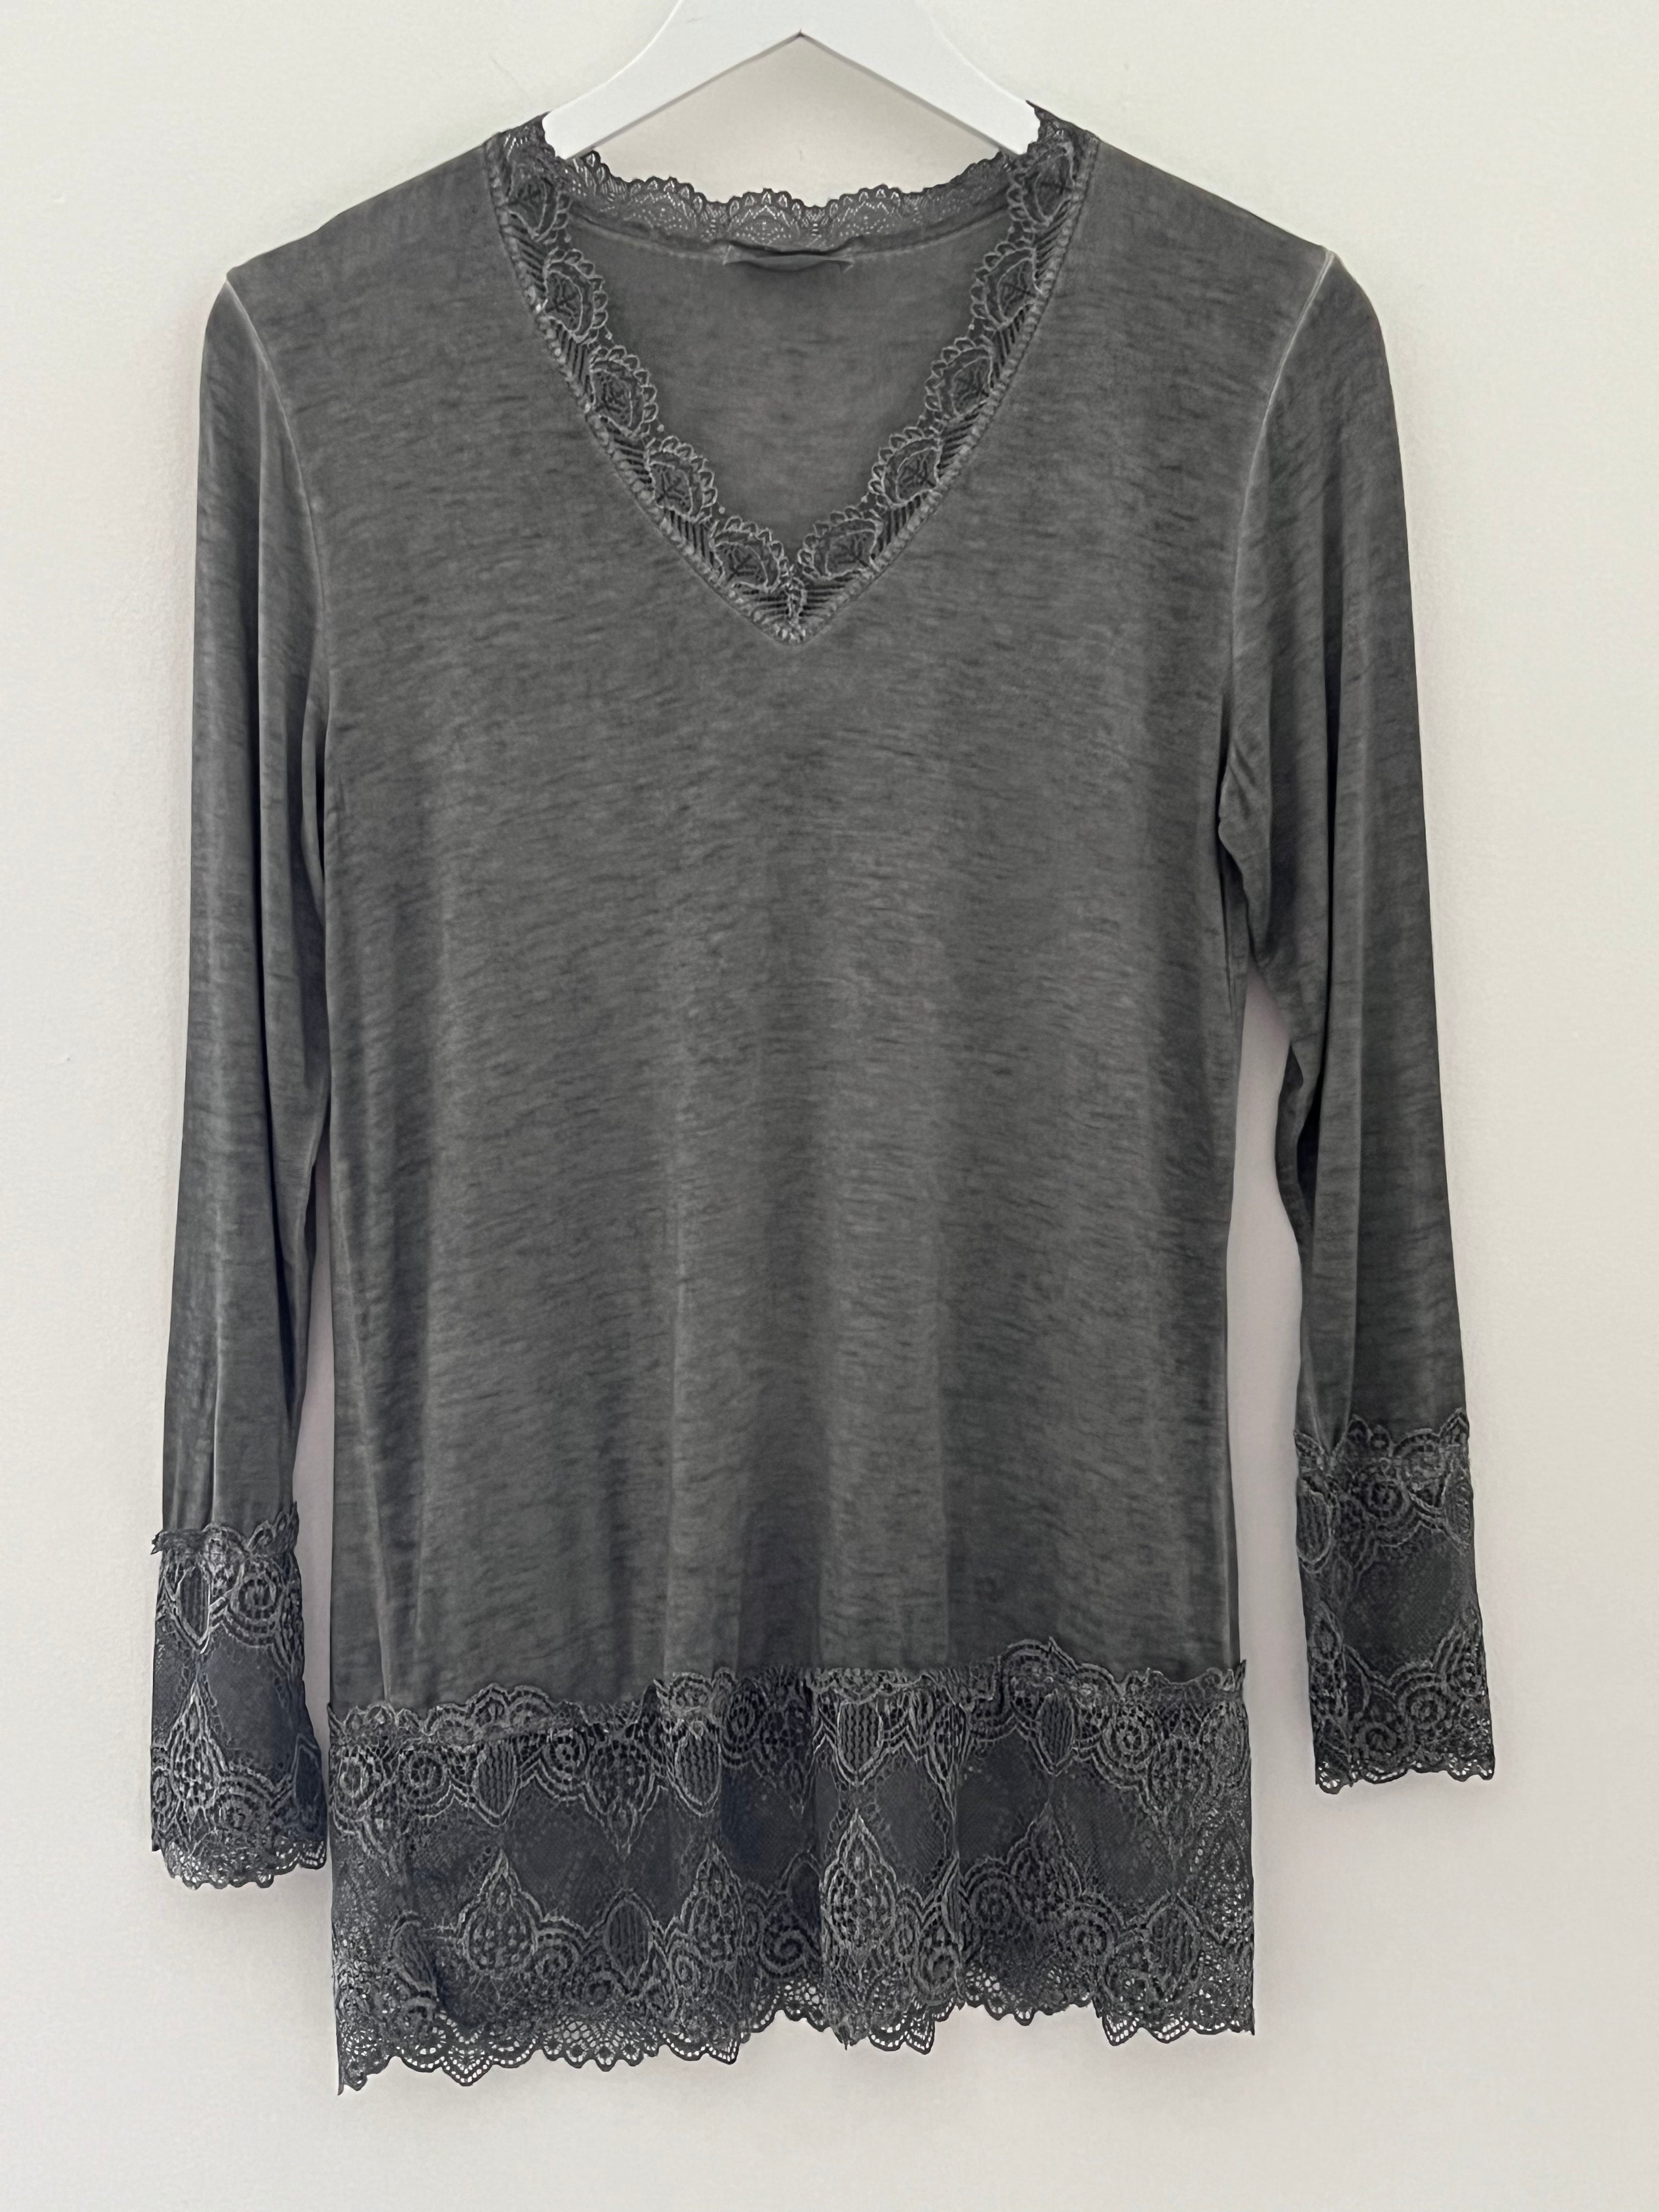 Luxe Base Top with Lace Trim in Charcoal